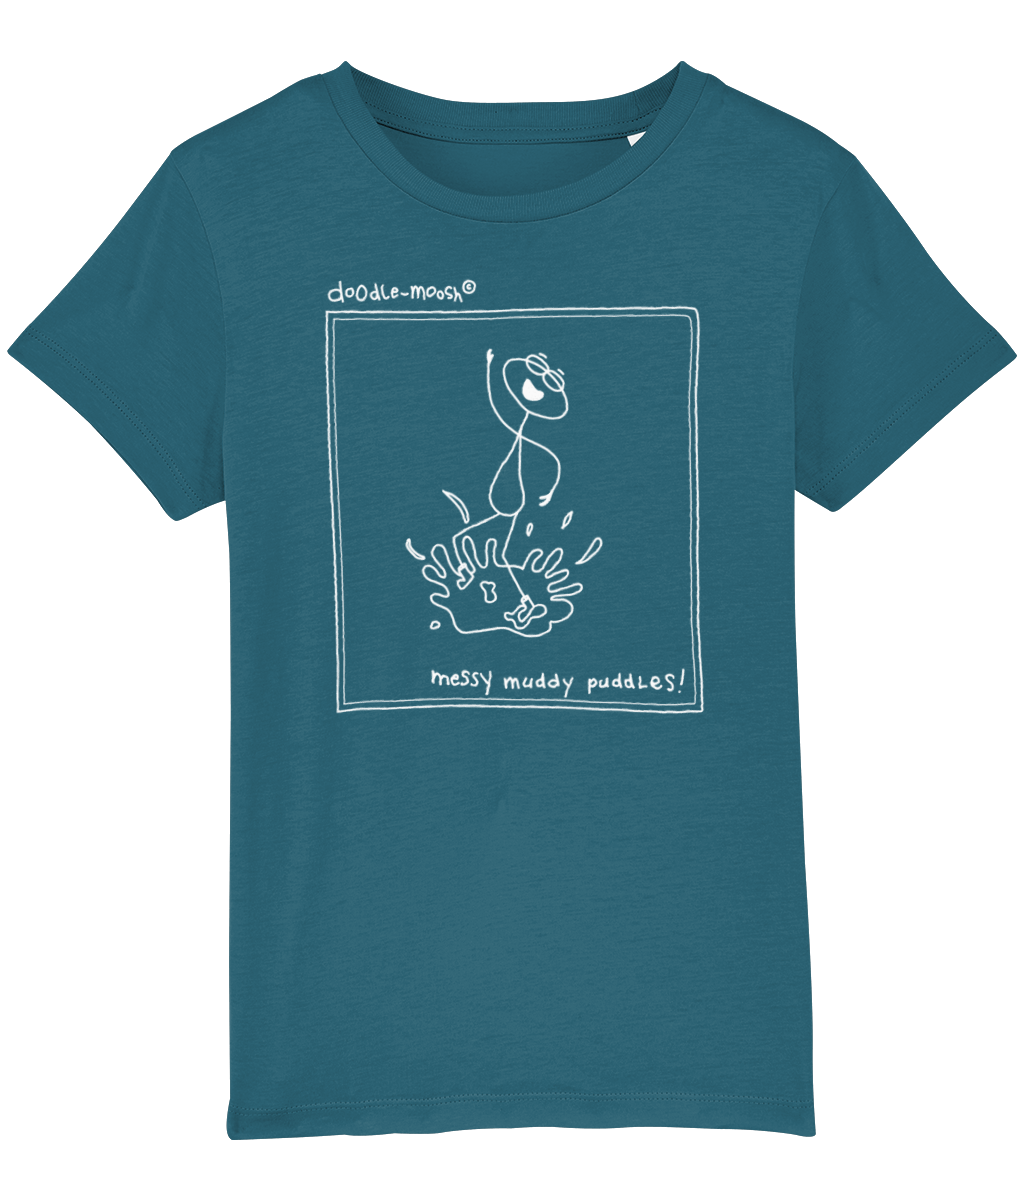 Messy muddy puddles t-shirt, blue with white